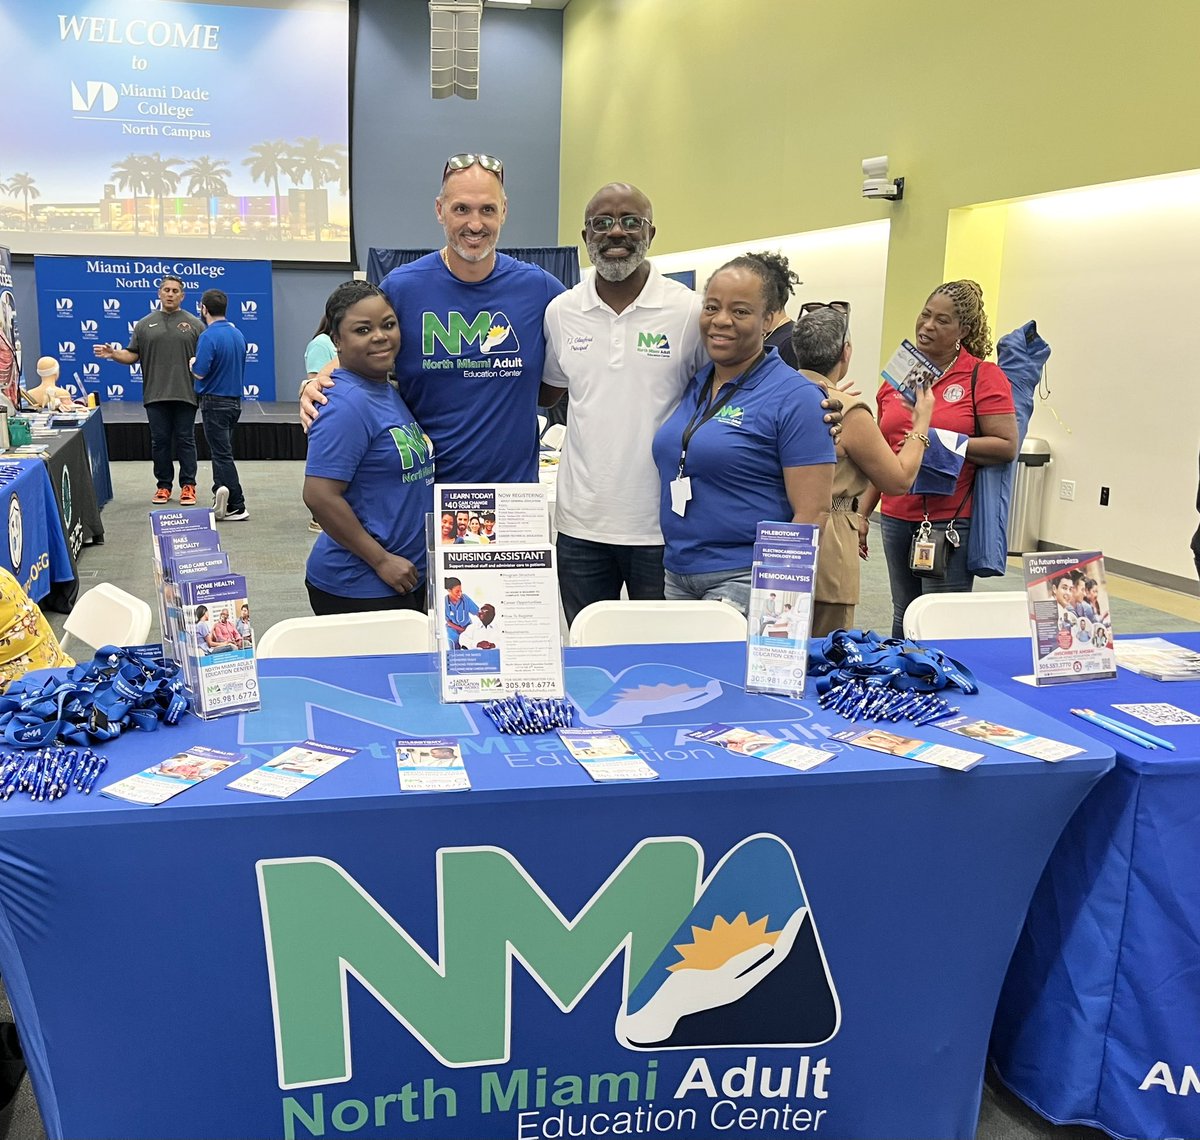 Reaching the community at the 2024 Parent Choice Expo at Miami Dade College North Campus. Come learn about the many programs MDCPS has to offer. #MDCPSYourBestChoice #NMAEC #AGreatStartToAnEvenGreaterFinish